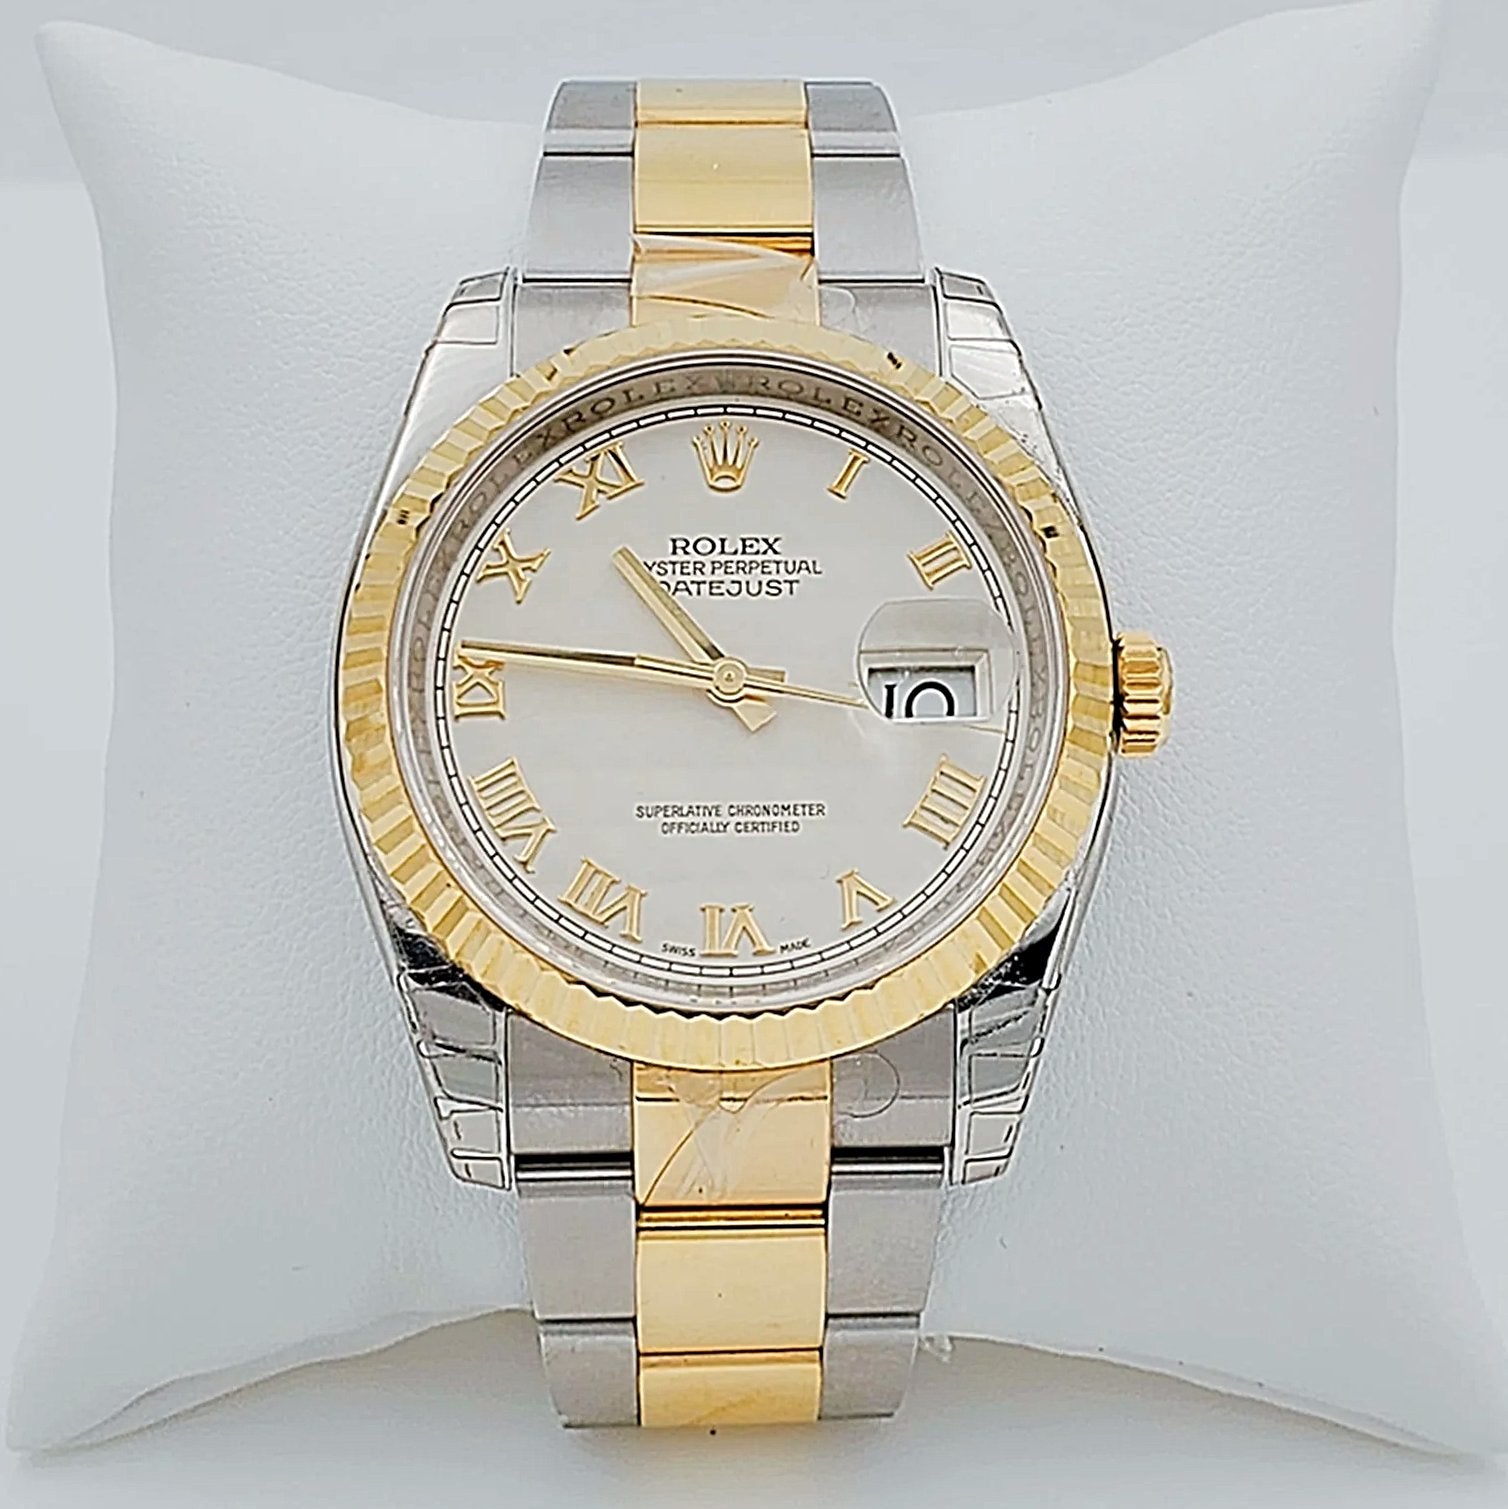 Men's Rolex DateJust 36mm Oyster Perpetual Two Tone 18K Gold / Stainless Steel B& Wristwatch w/ Egg Shell Dial & Fluted Bezel. (UNWORN 116203)